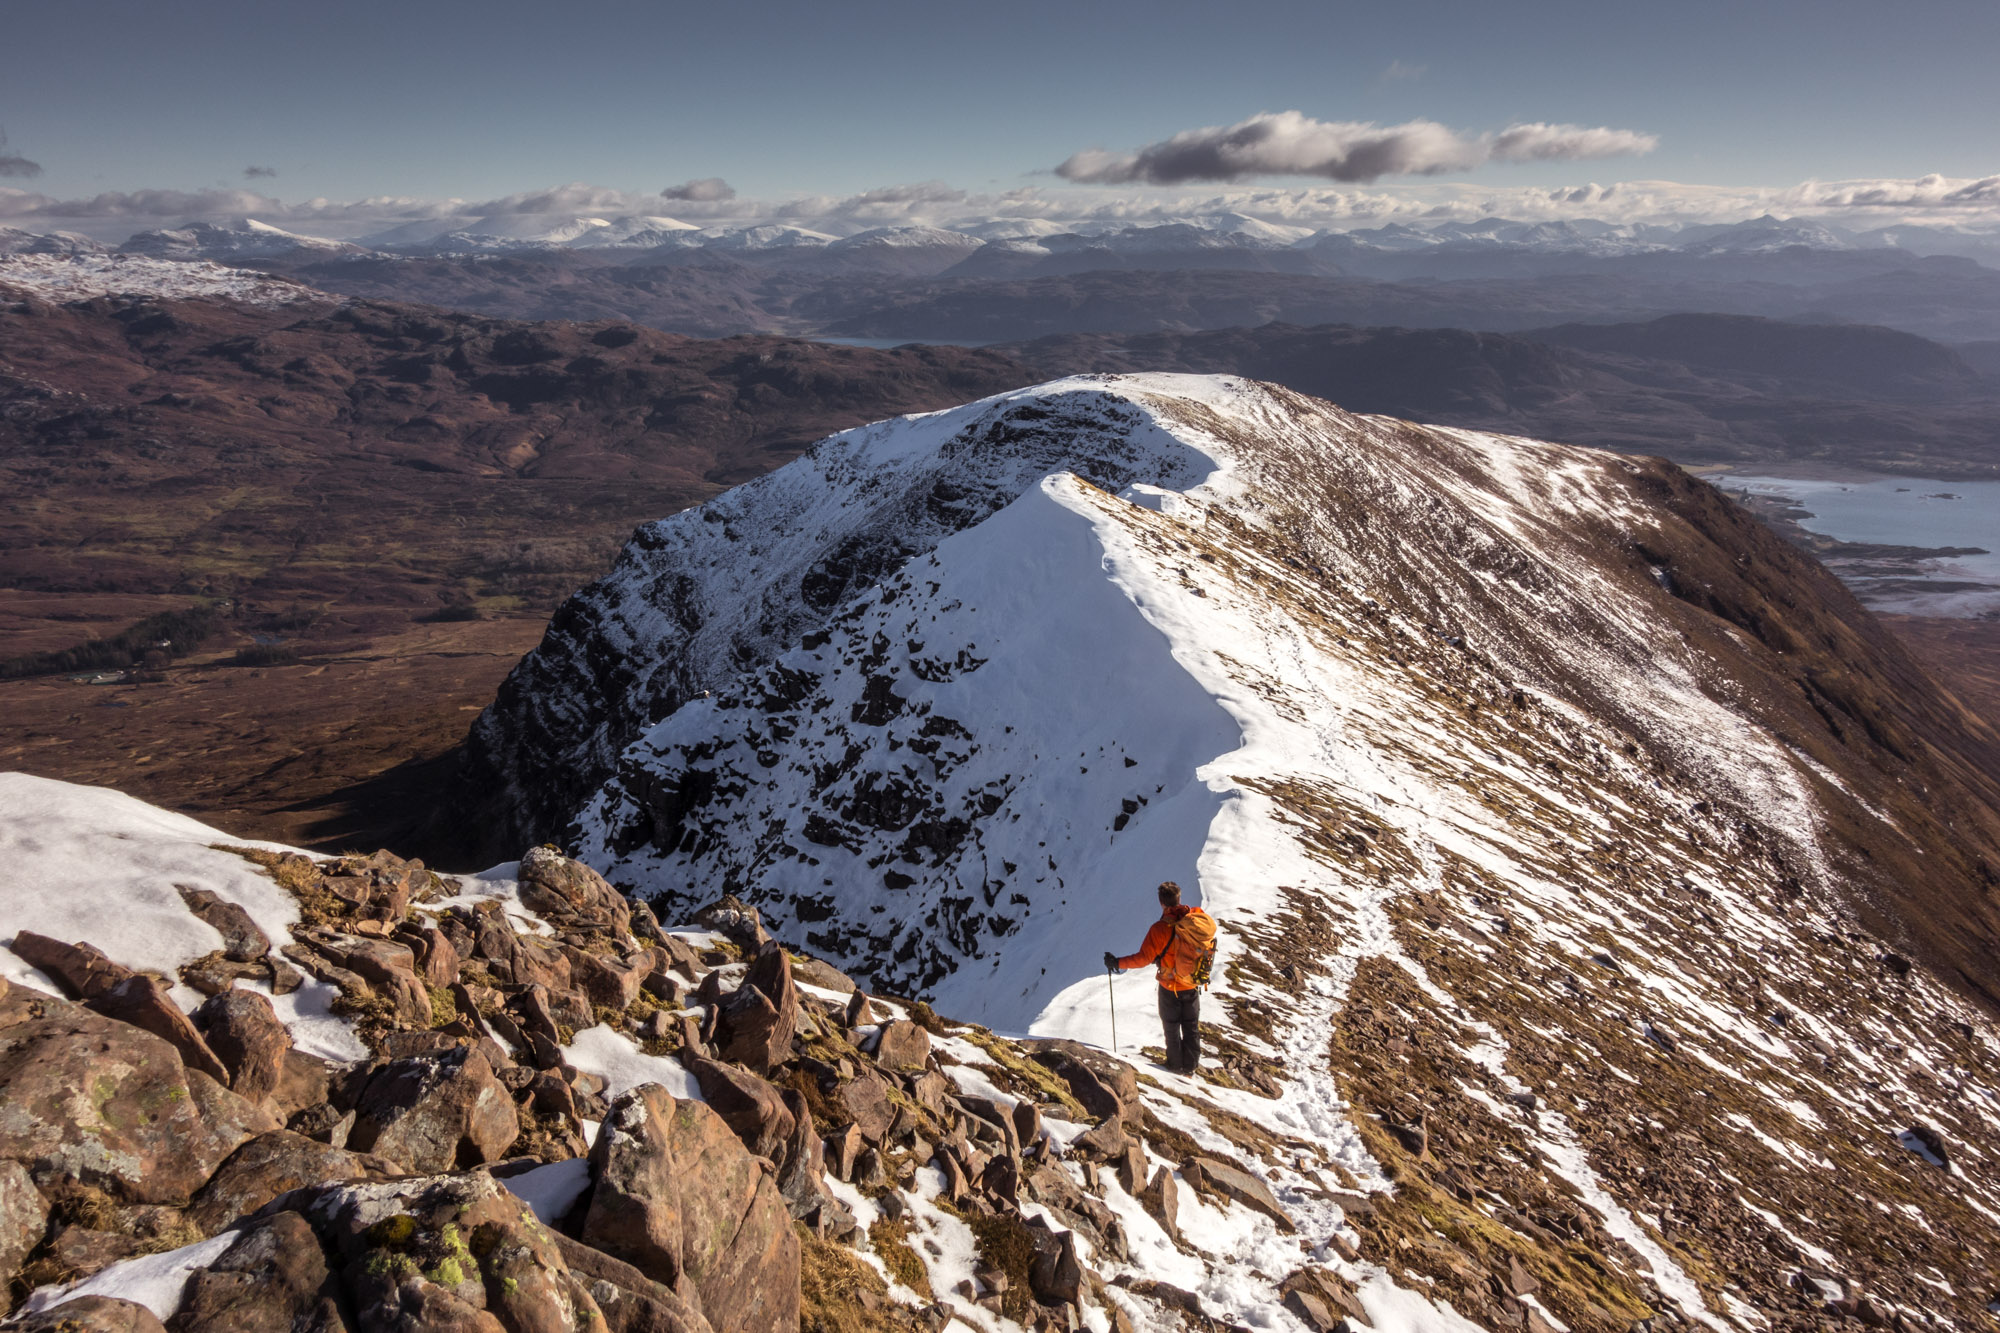 Andy taking it all in on the descent from Beinn Bhan 